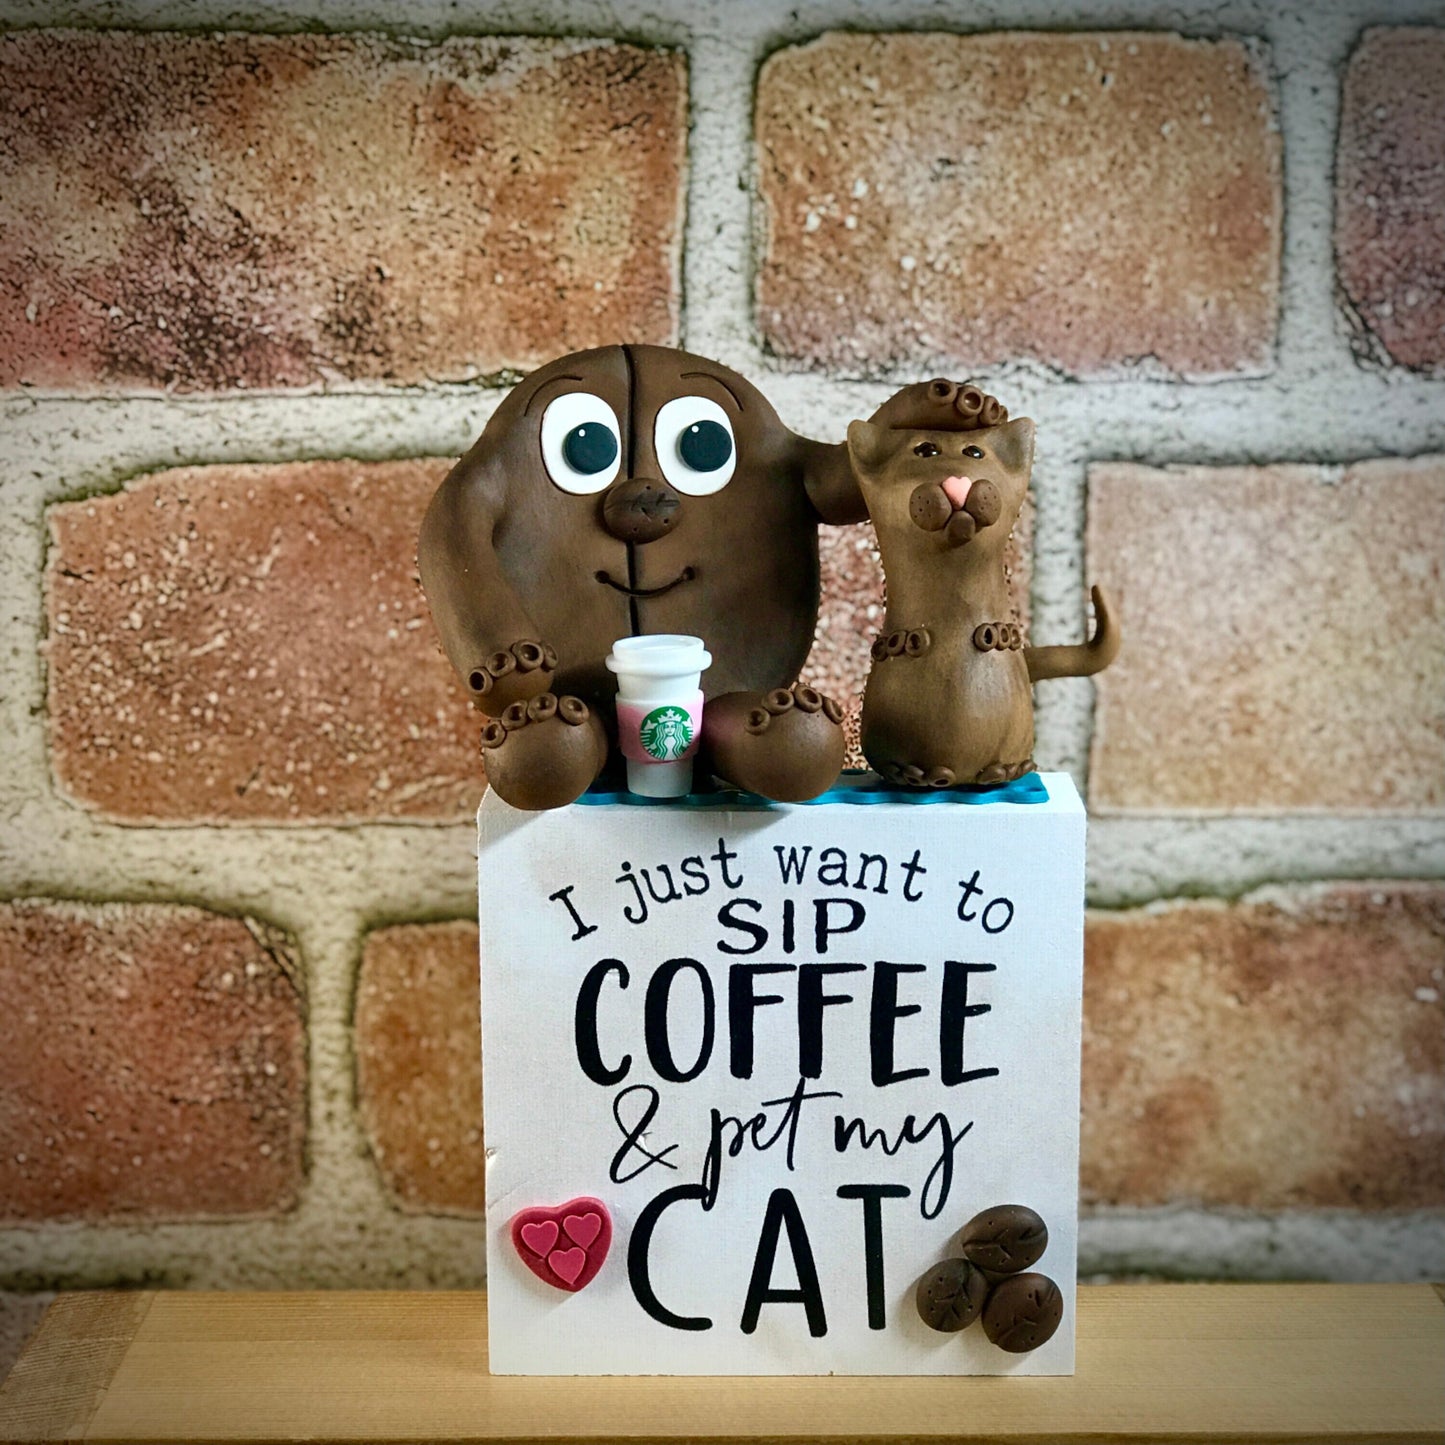 I Just Want to Sip Coffee and Pet My Cat Coffee Bean Pals, Love Coffee and Kitty Cats, Clay Characters, Coffee Nook Decor, Java Home Decor